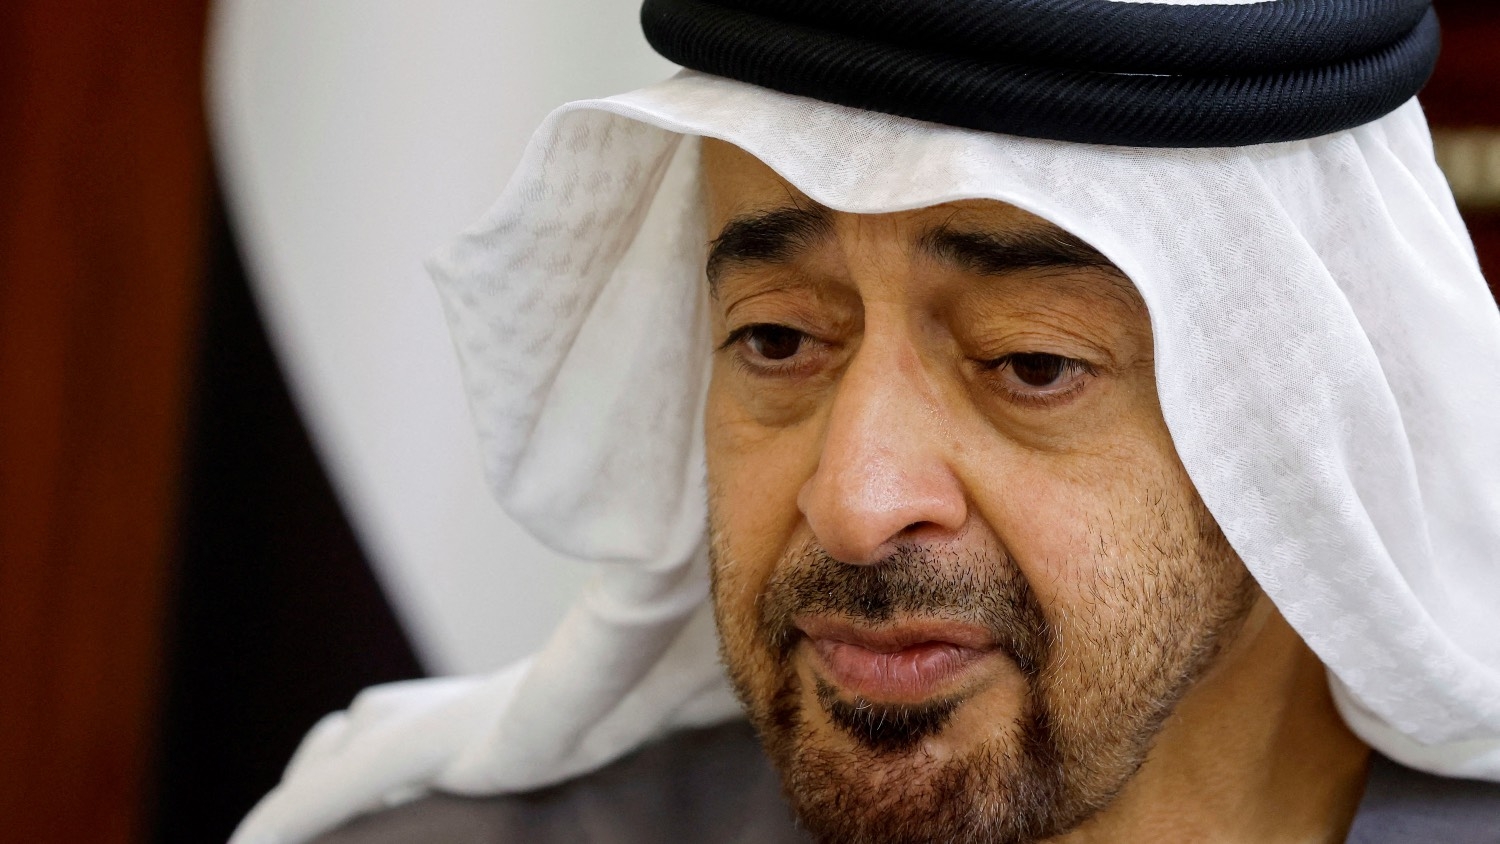 Emirati officials told Axios that it was further proof of Mohammed bin Zayed's growing feeling that the US had abandoned them in a time of need.